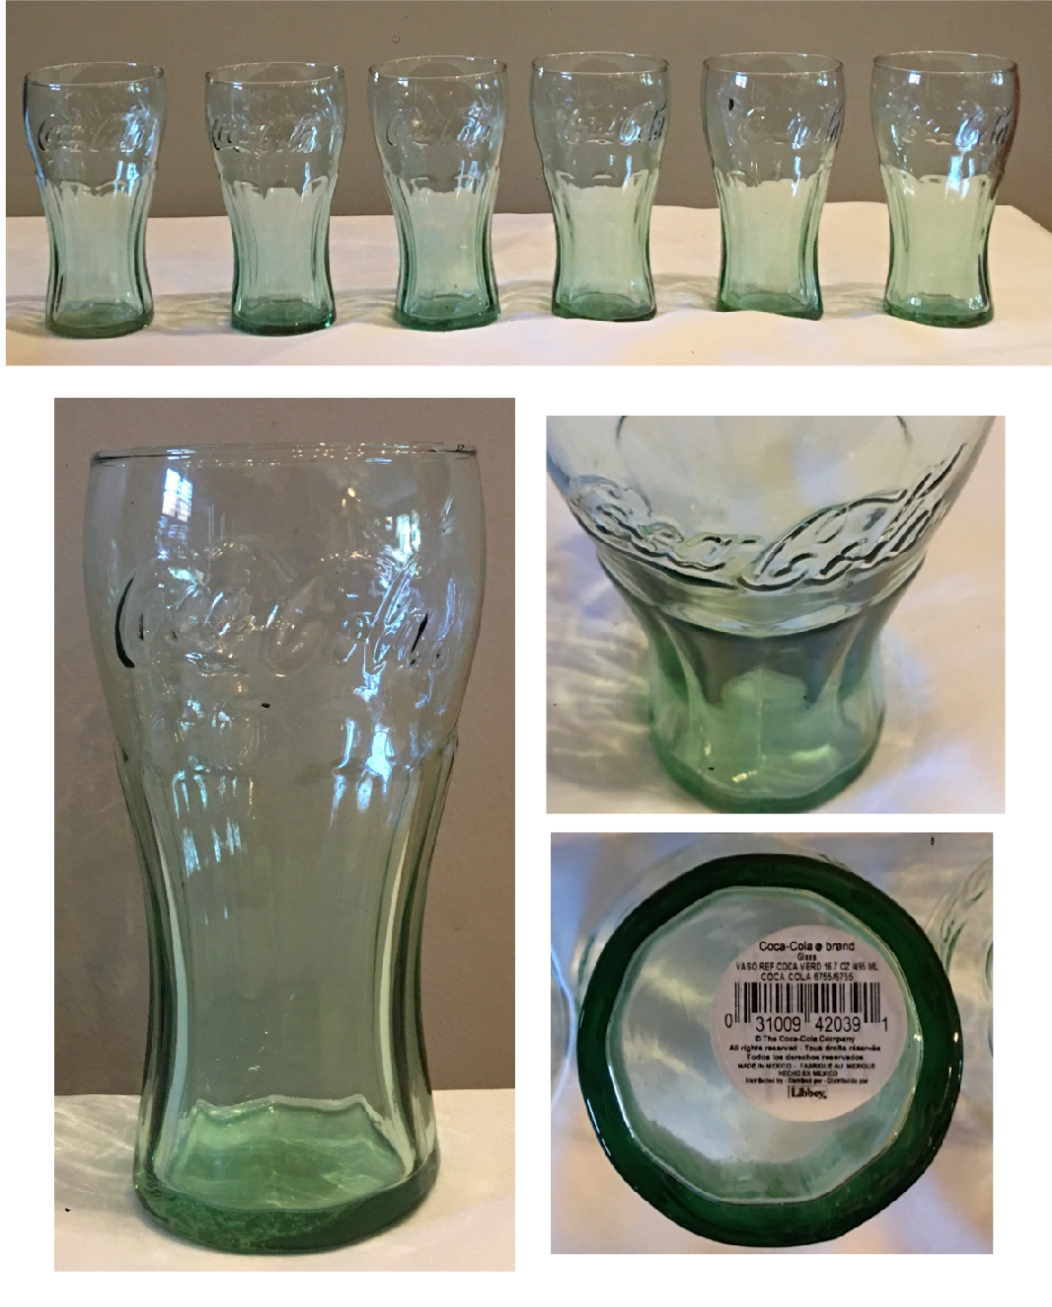 Libbey Coca Cola Coke 16 oz Drinking Glasses Set of 6 Green Tint Embossed NEW